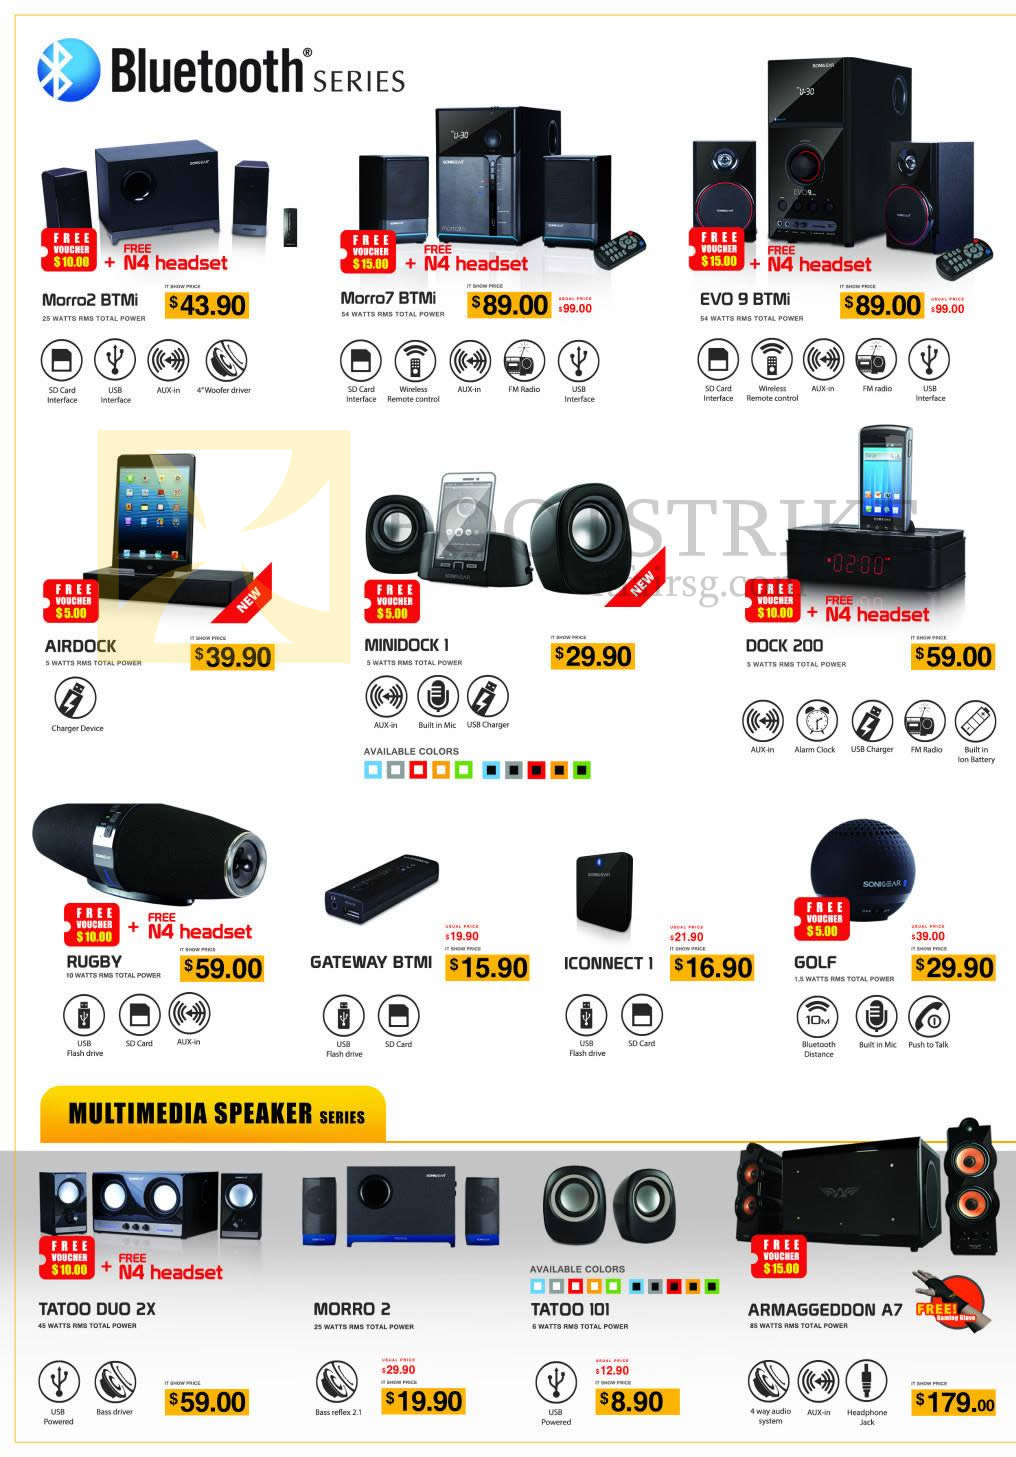 IT SHOW 2014 price list image brochure of Leap Frog Sonic Gear Speakers Bluetooth Morro, Evo, Airdock, MiniDock, Rugby, Gateway, Golf, Tatoo Duo, Armaggeddon A7